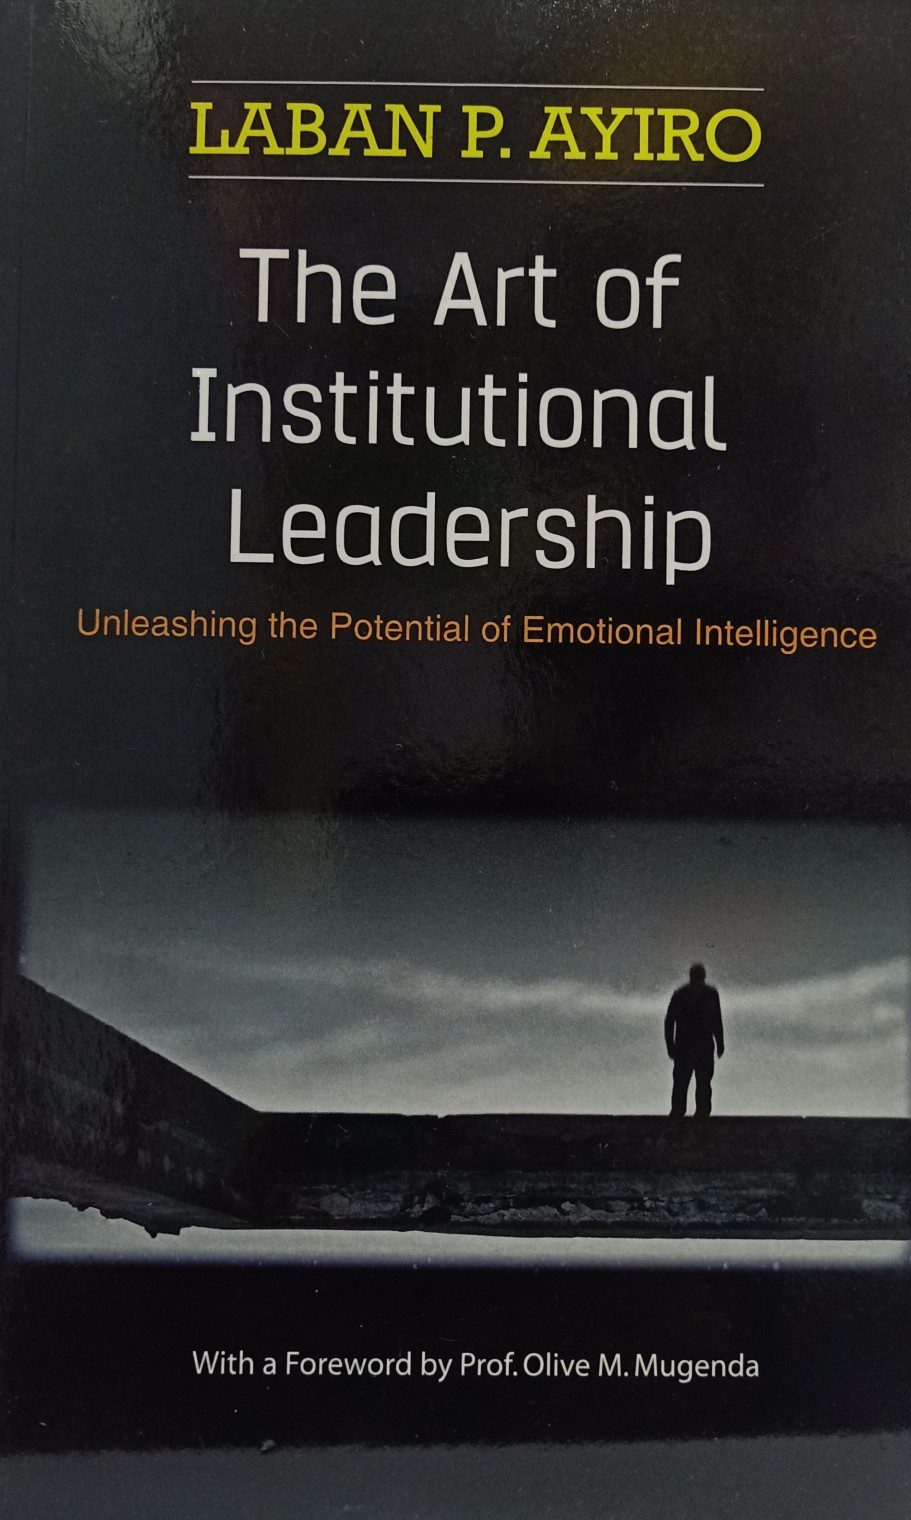 Art of institutional leadership Unleashing the potential of emotional intelligence by Laban P. Ayiro